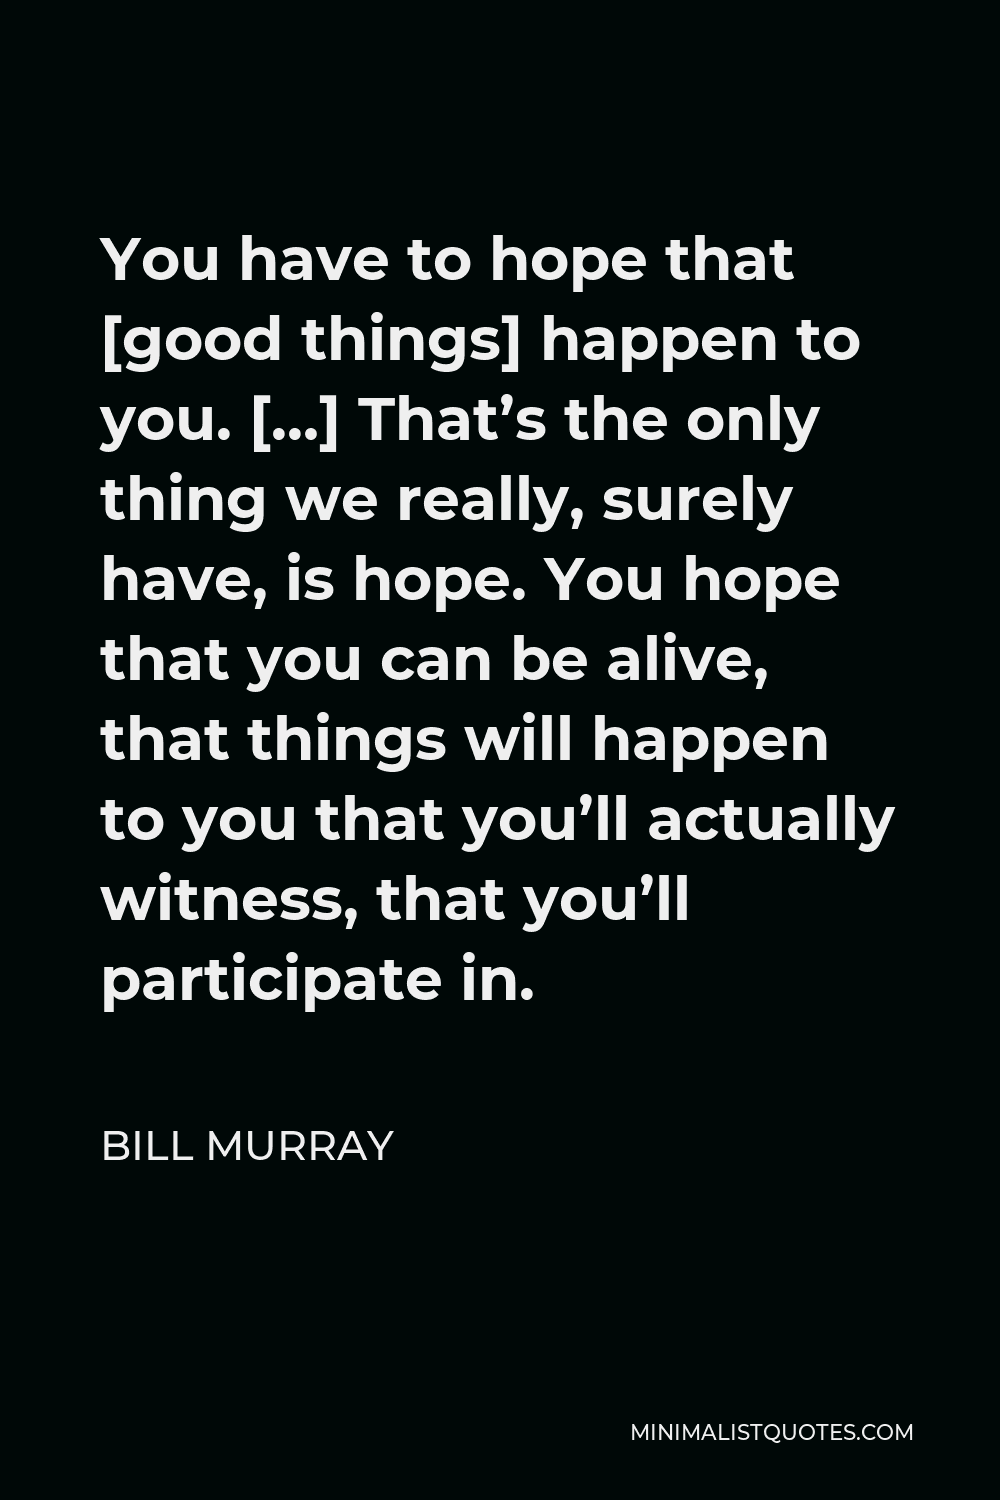 Bill Murray Quote - You have to hope that [good things] happen to you. […] That’s the only thing we really, surely have, is hope. You hope that you can be alive, that things will happen to you that you’ll actually witness, that you’ll participate in.